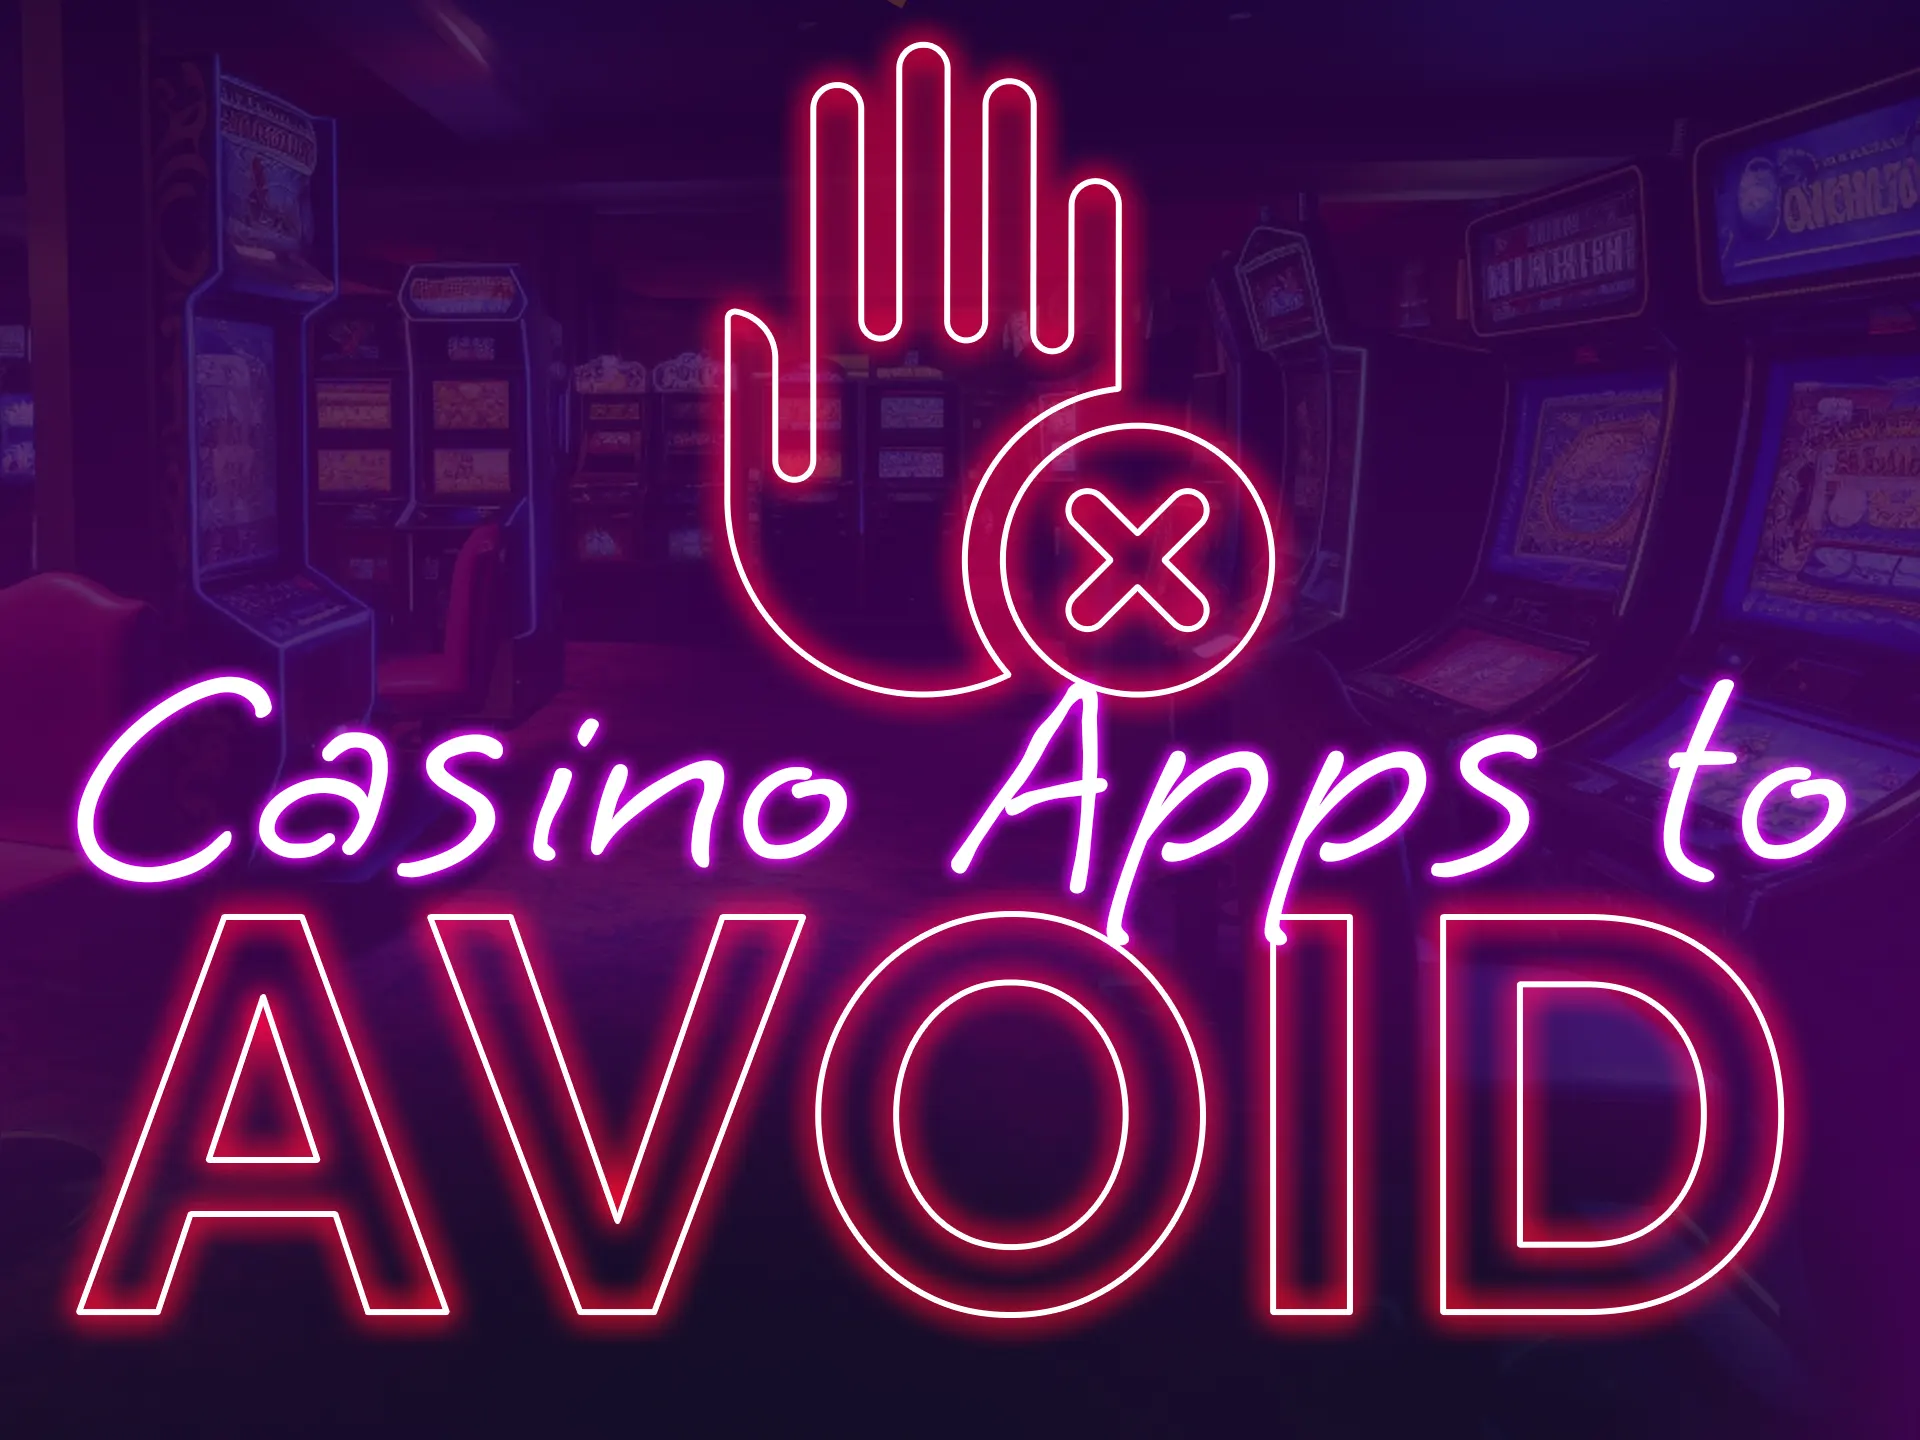 We advise you to avoid some apps of casinos as they may be unfair.